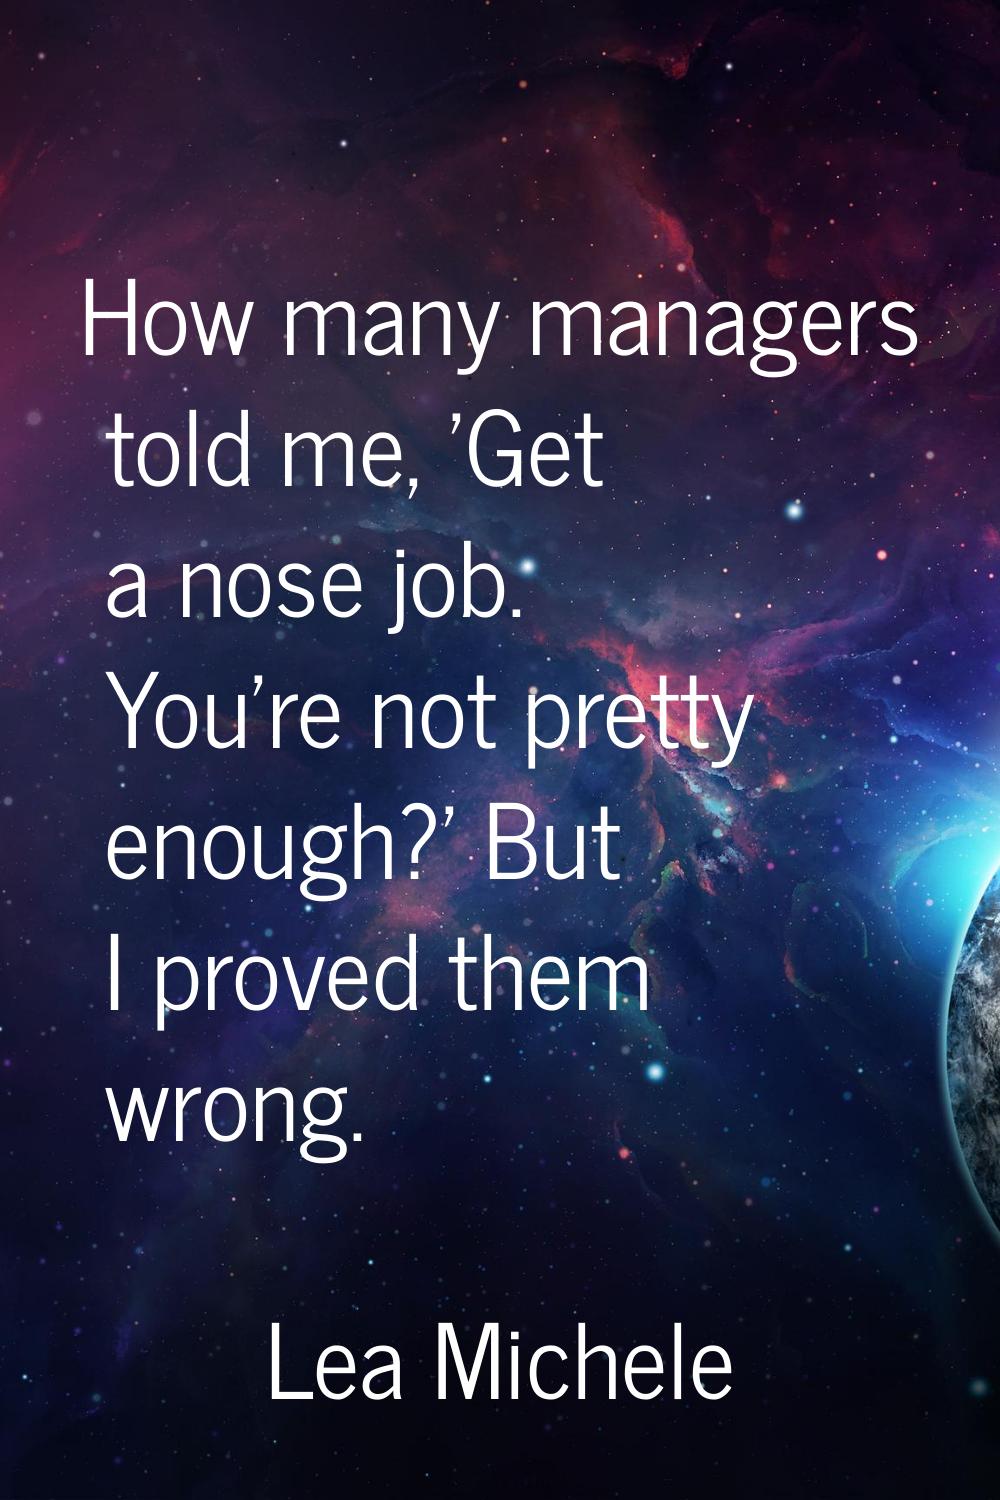 How many managers told me, 'Get a nose job. You're not pretty enough?' But I proved them wrong.